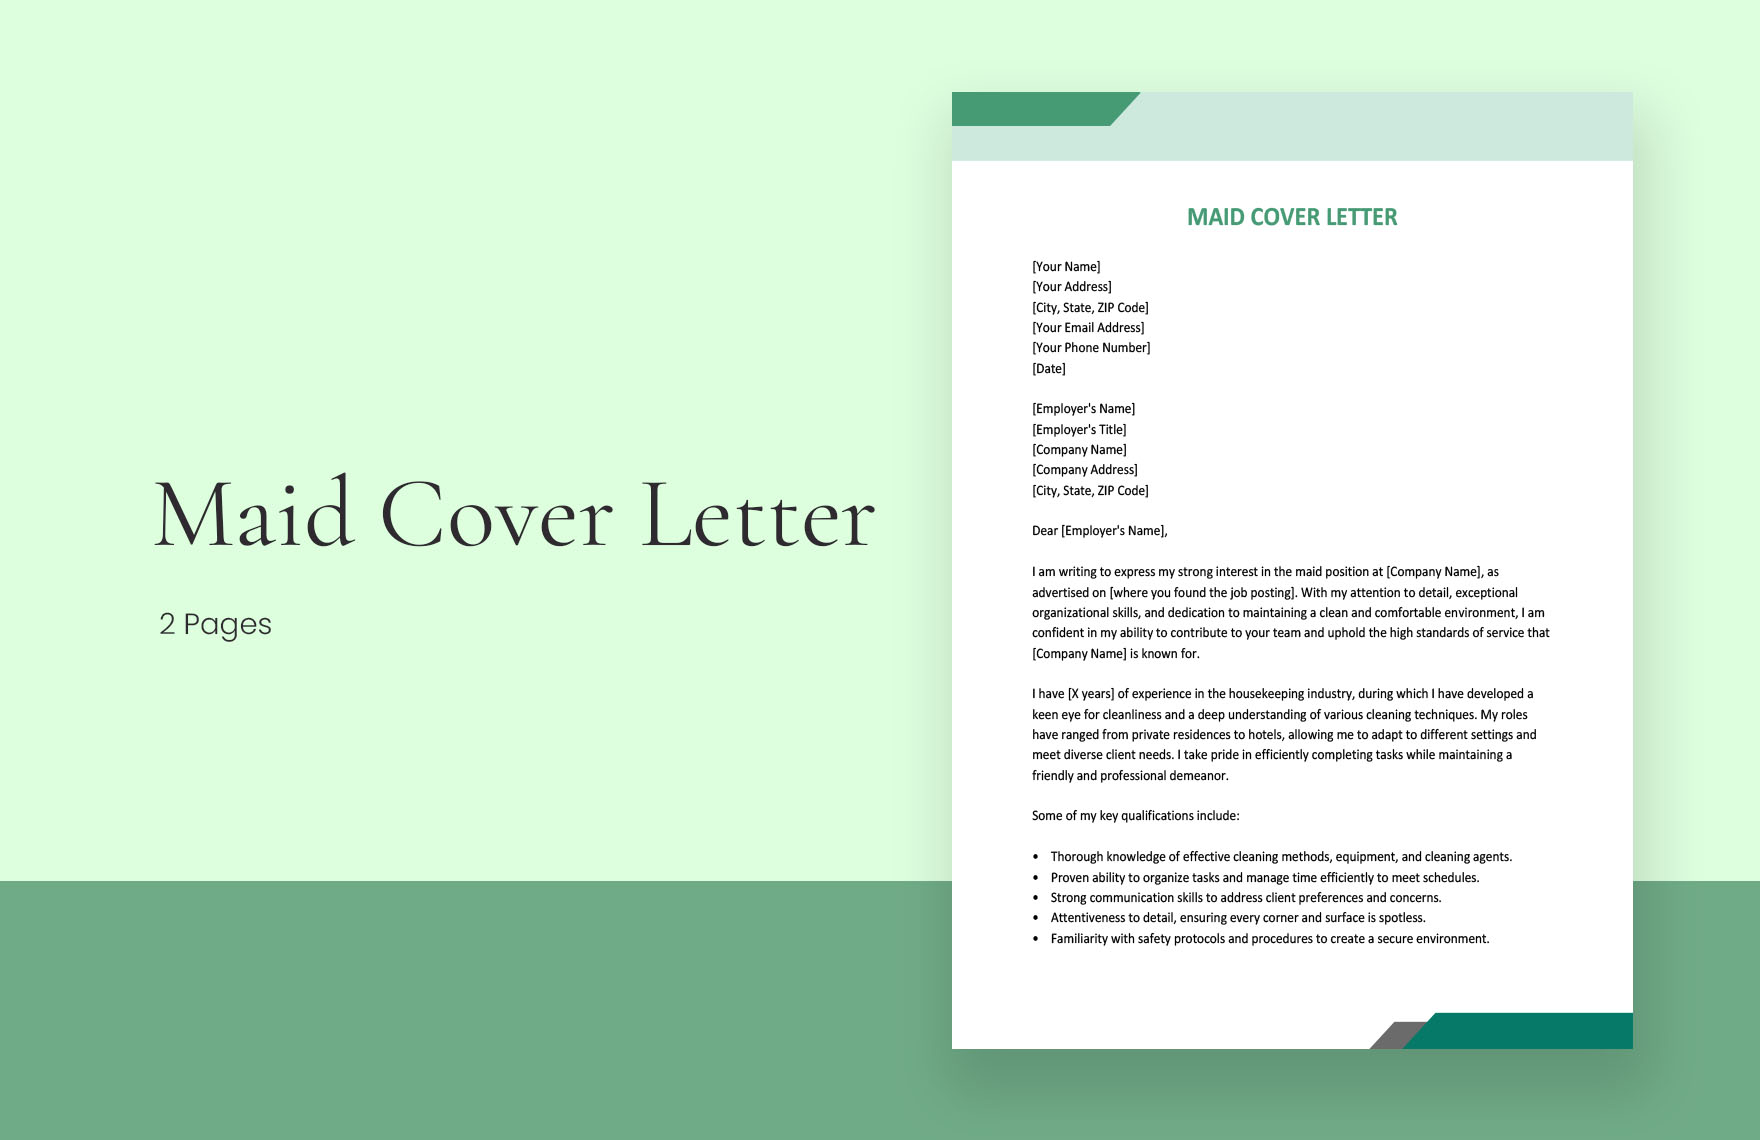 Maid Cover Letter in Word, Google Docs